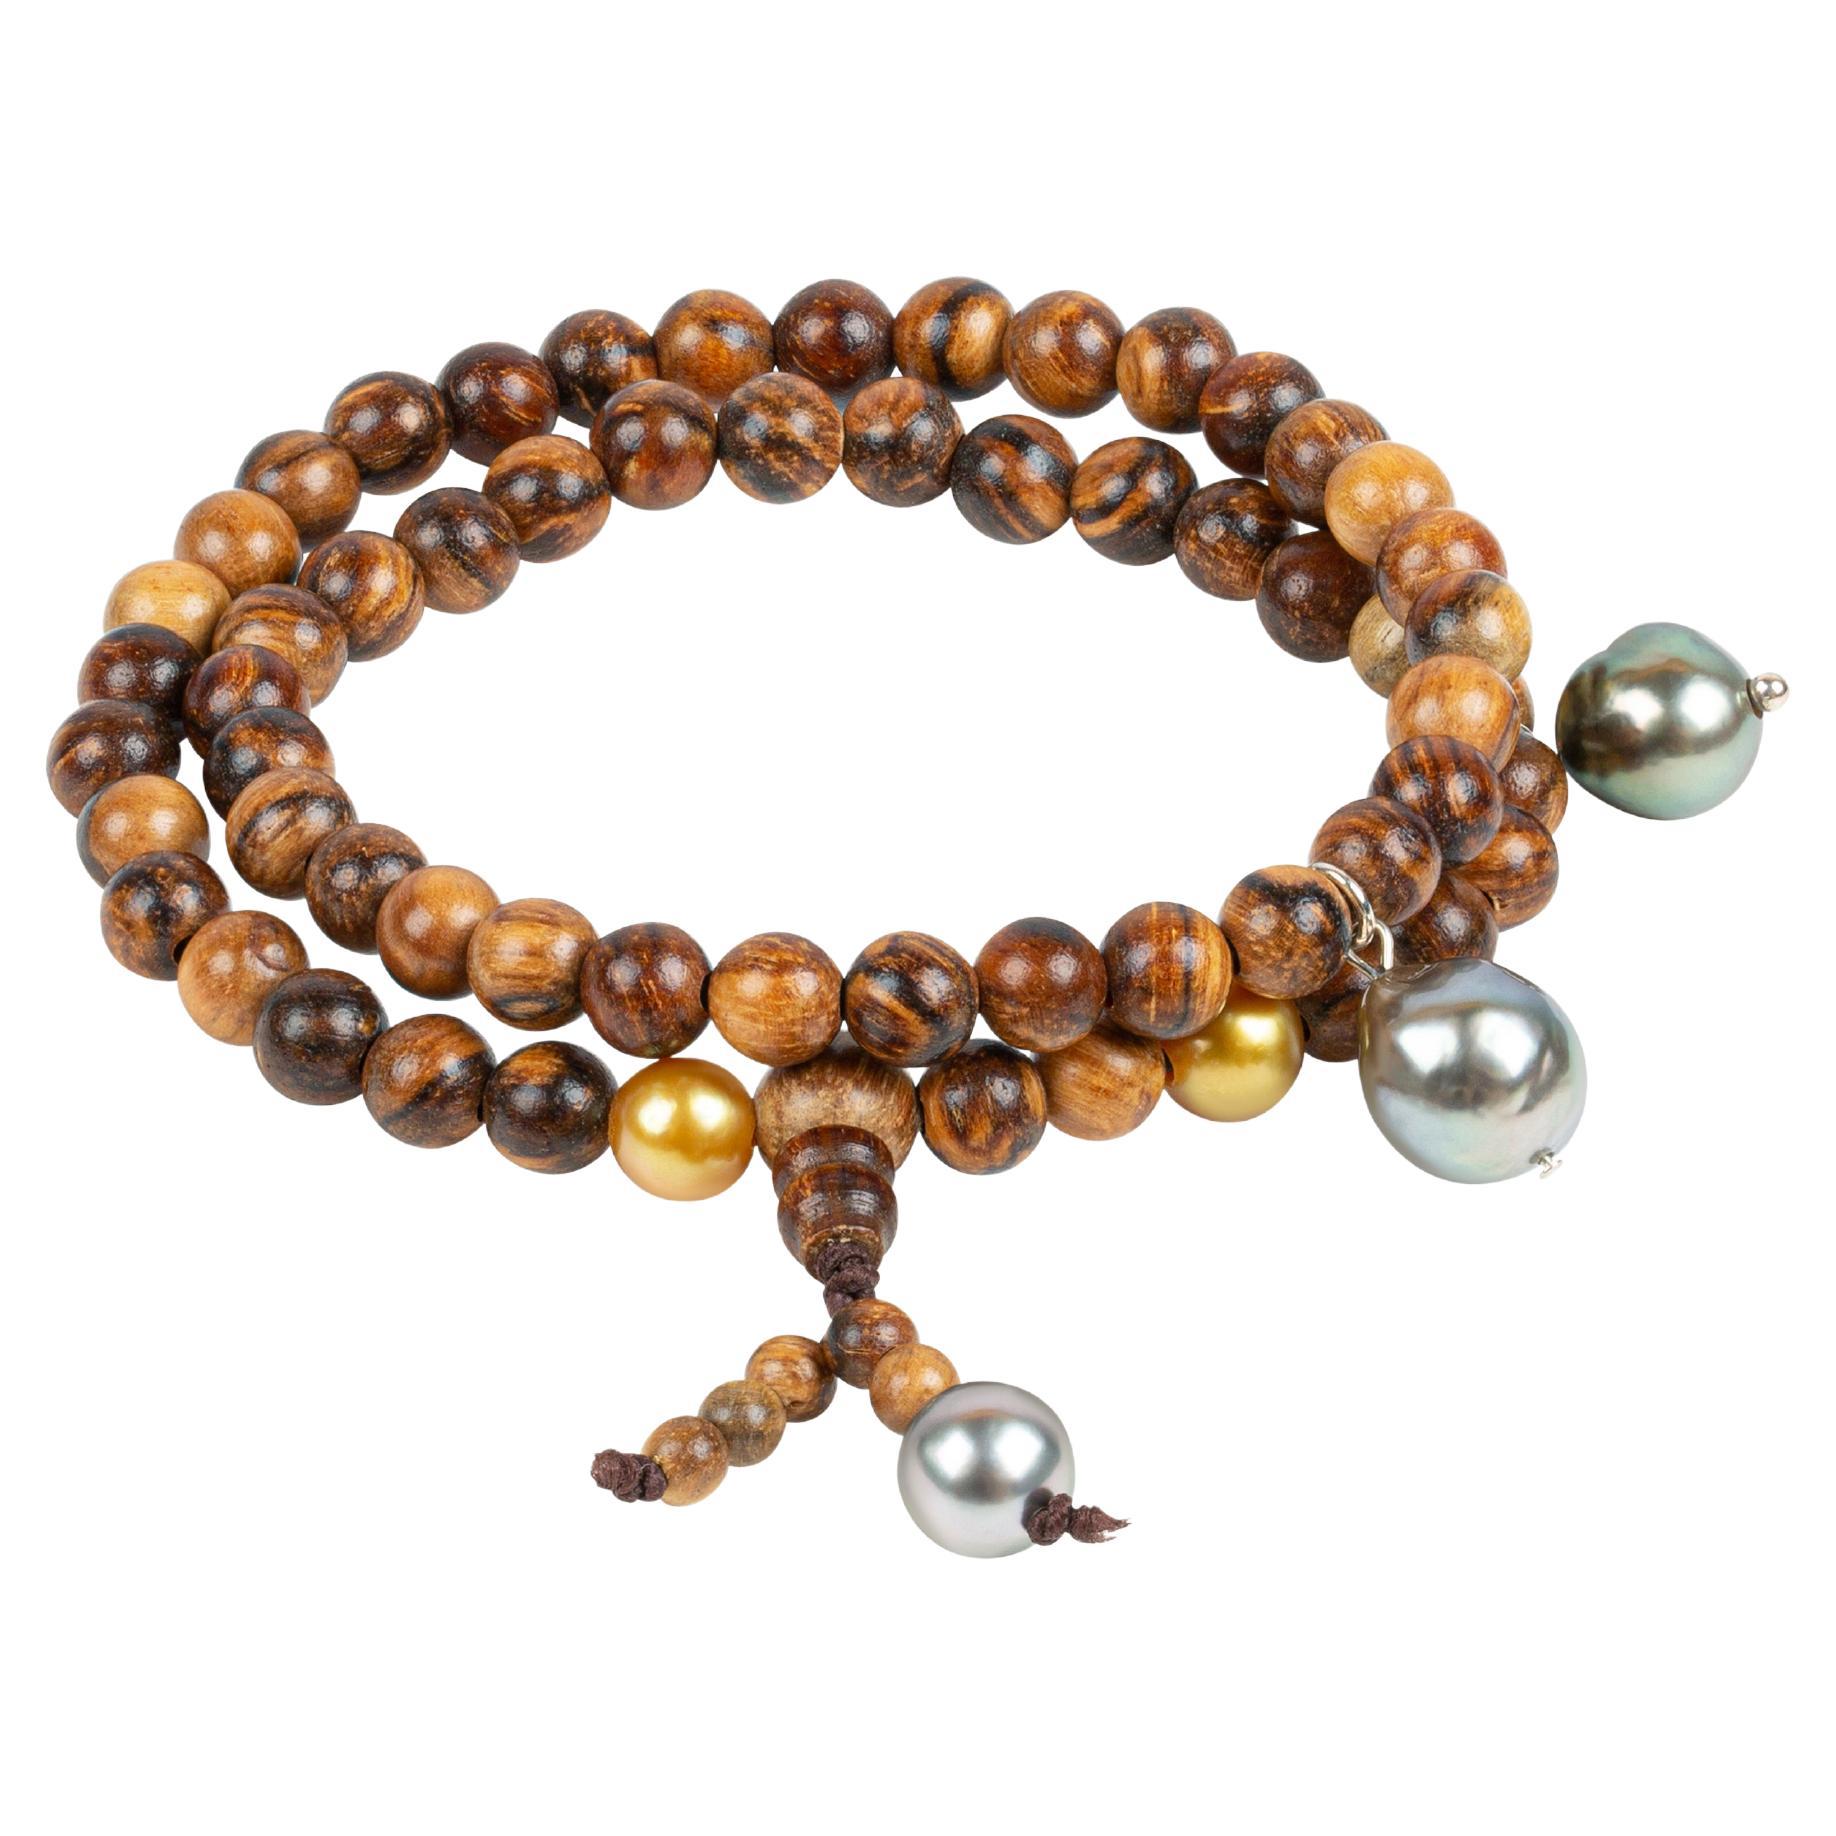 Prayer bracelet with sandalwood beads, Golden South Sea and Tahiti pearls For Sale